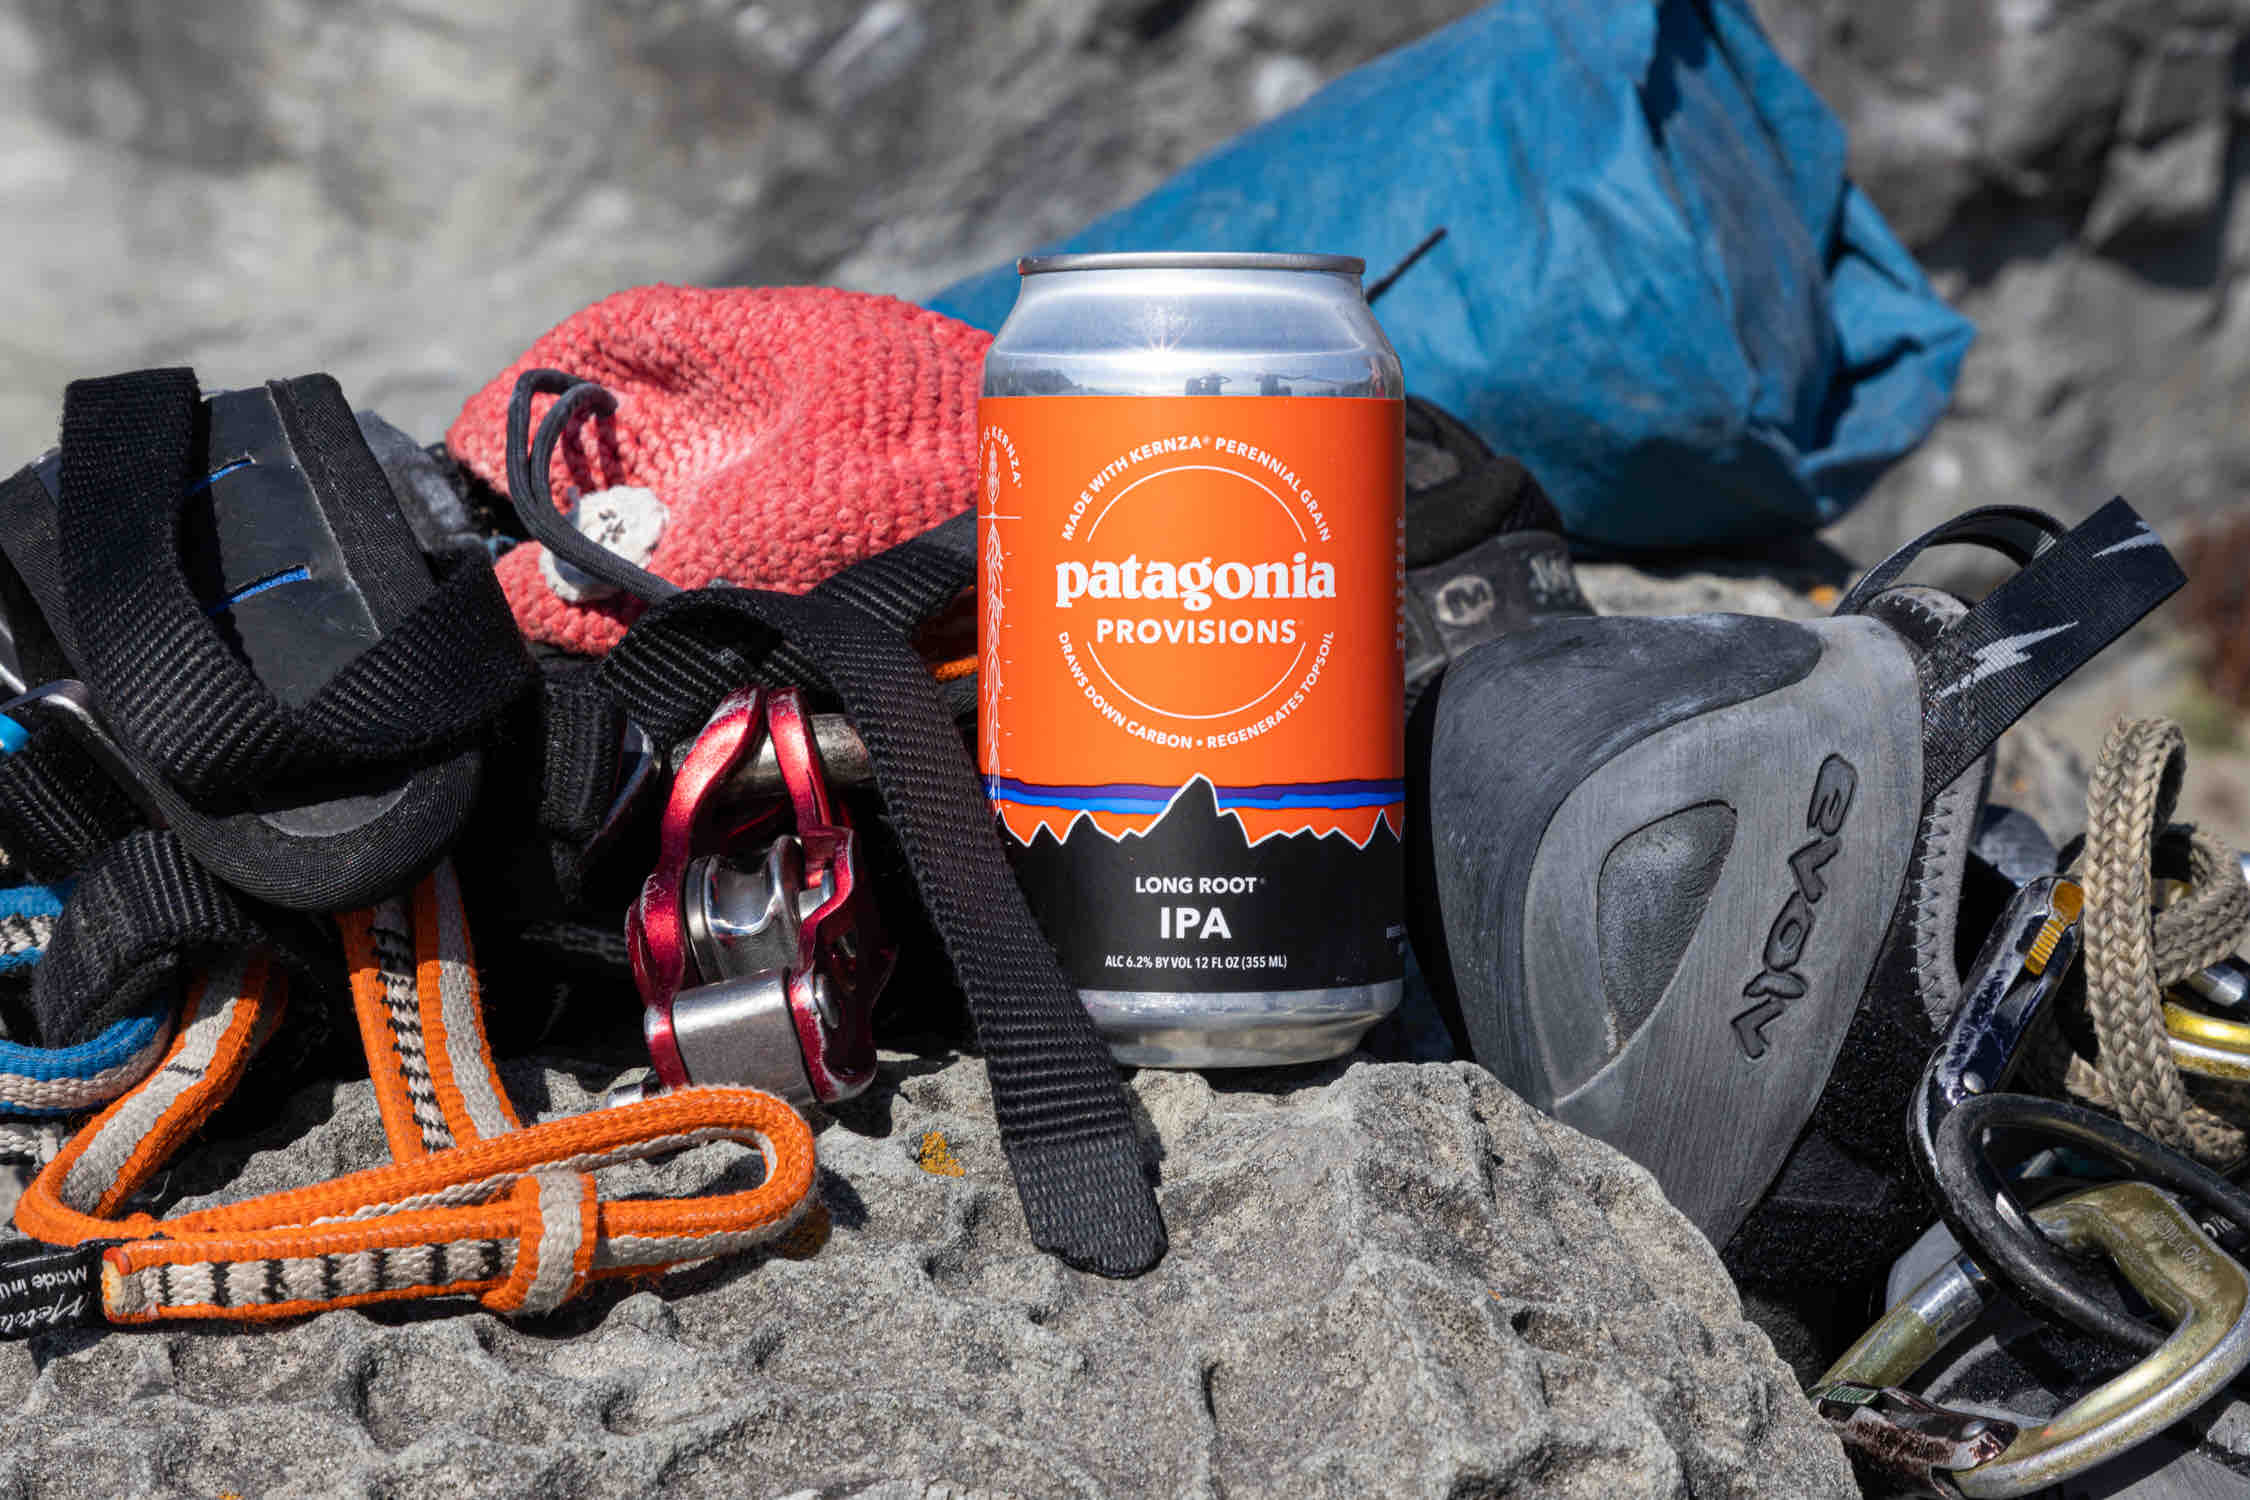 Patagonia Provisions, in partnership with Hopworks Urban Brewery, has just released Patagonia Provisions Long Root IPA. (photo courtesy of.Amy Kumler)